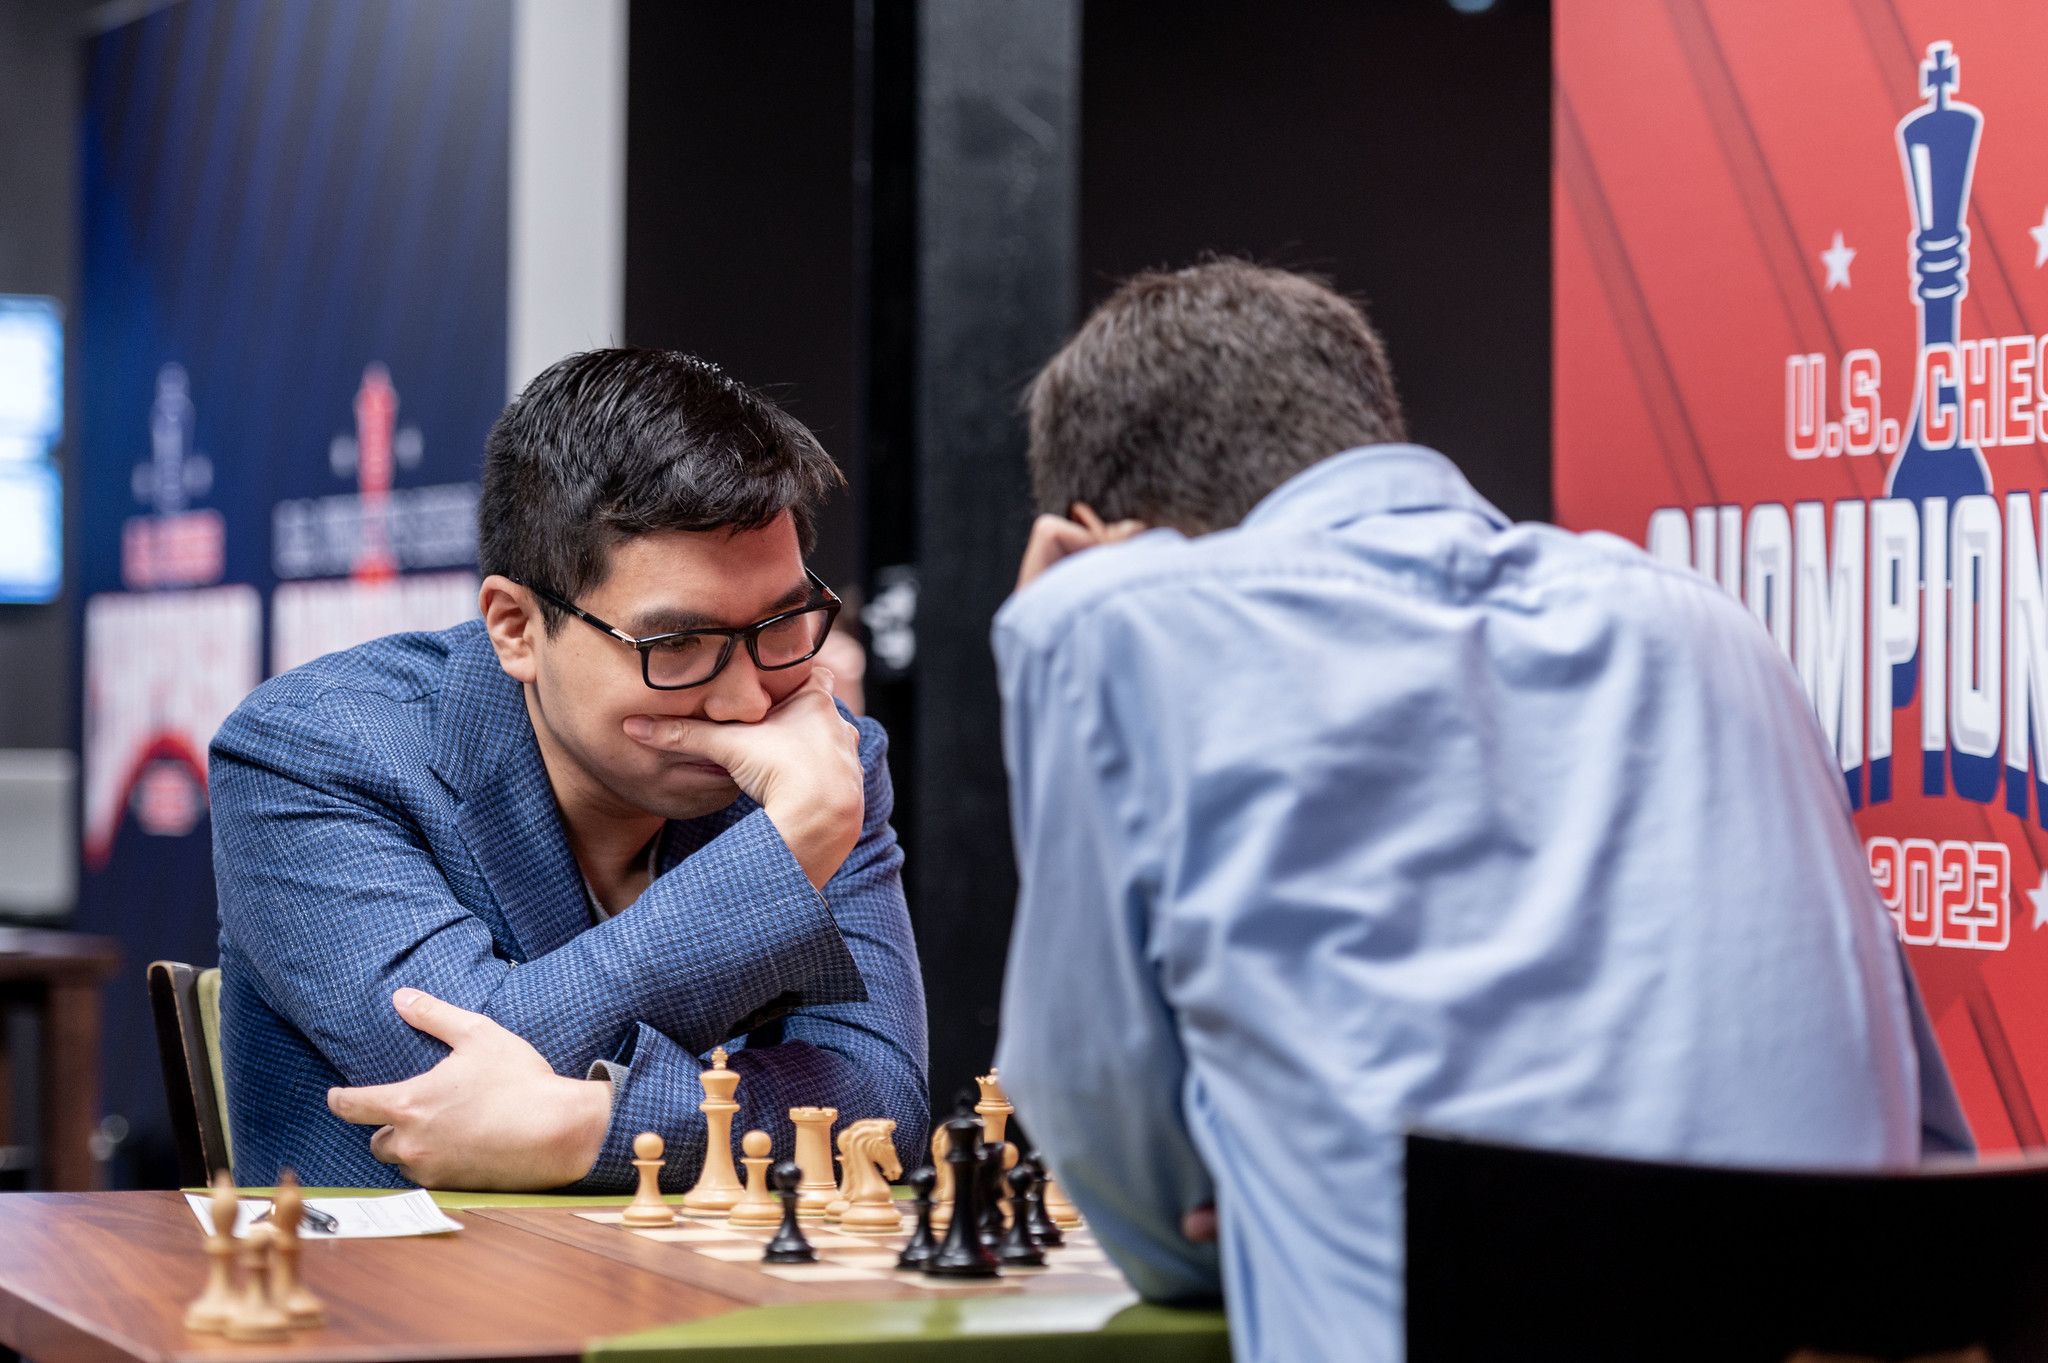 US Chess Championships R9: Leaders Draw, Caruana Wins 